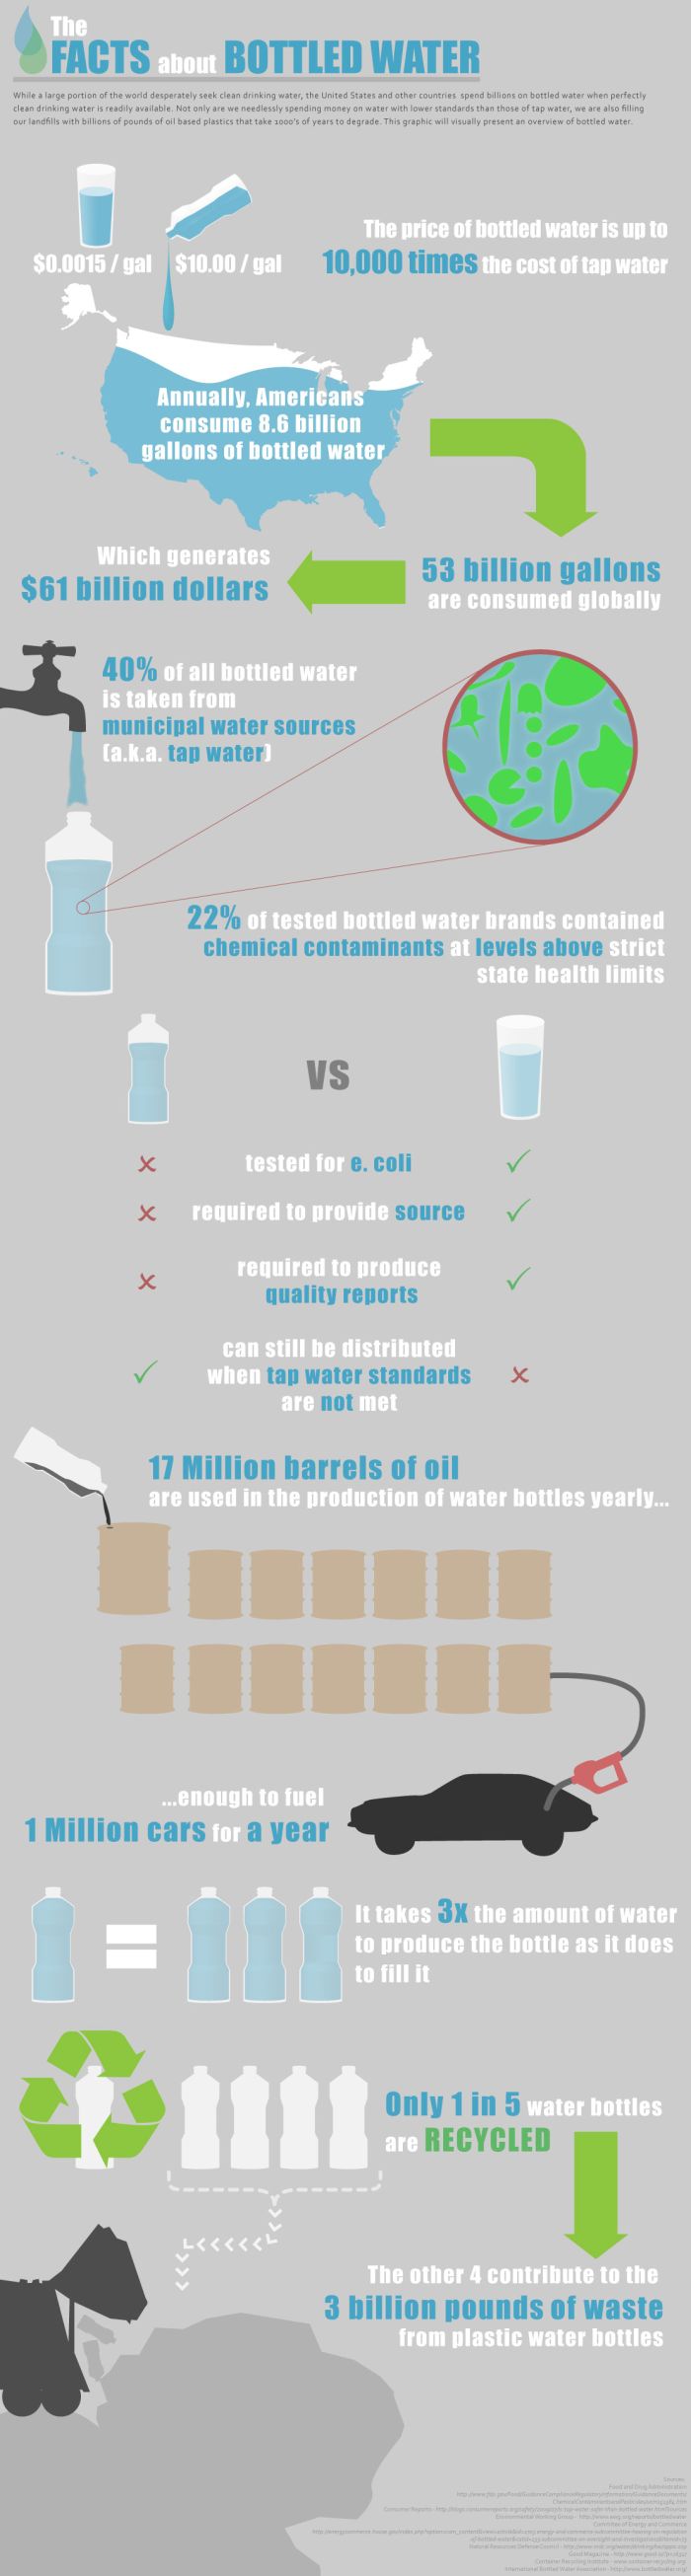 The Facts About Bottled Water (pic)